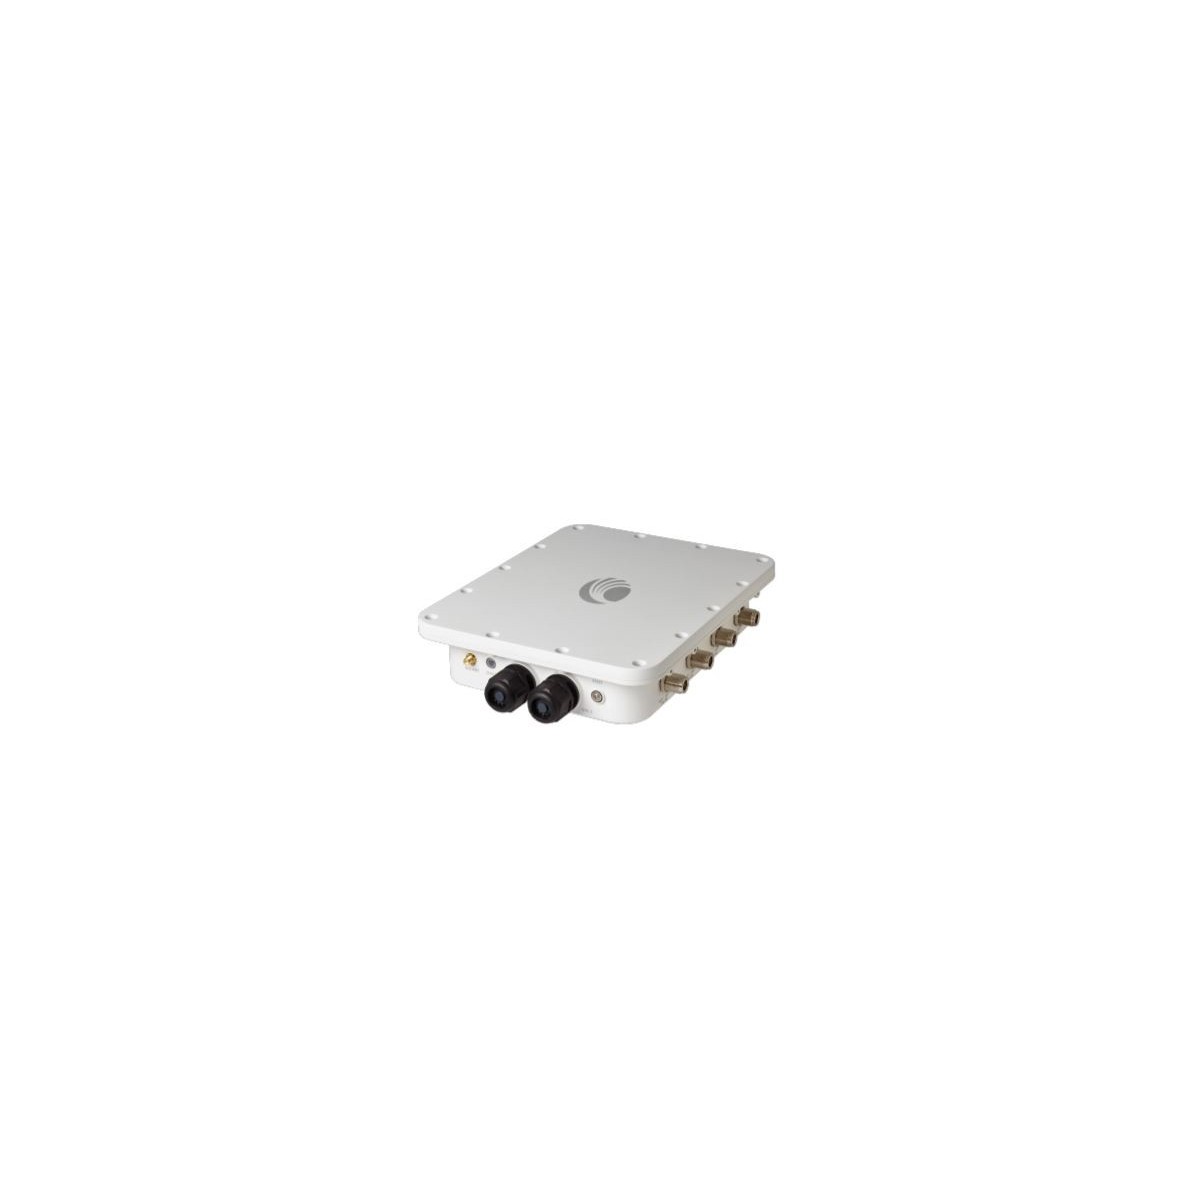 Cambium Networks Cambium Xirrus Outdoor 4x4 AP. Dual 11ac Wave 2 SDR radios 5GHz-2.4GHz. External - Access Point